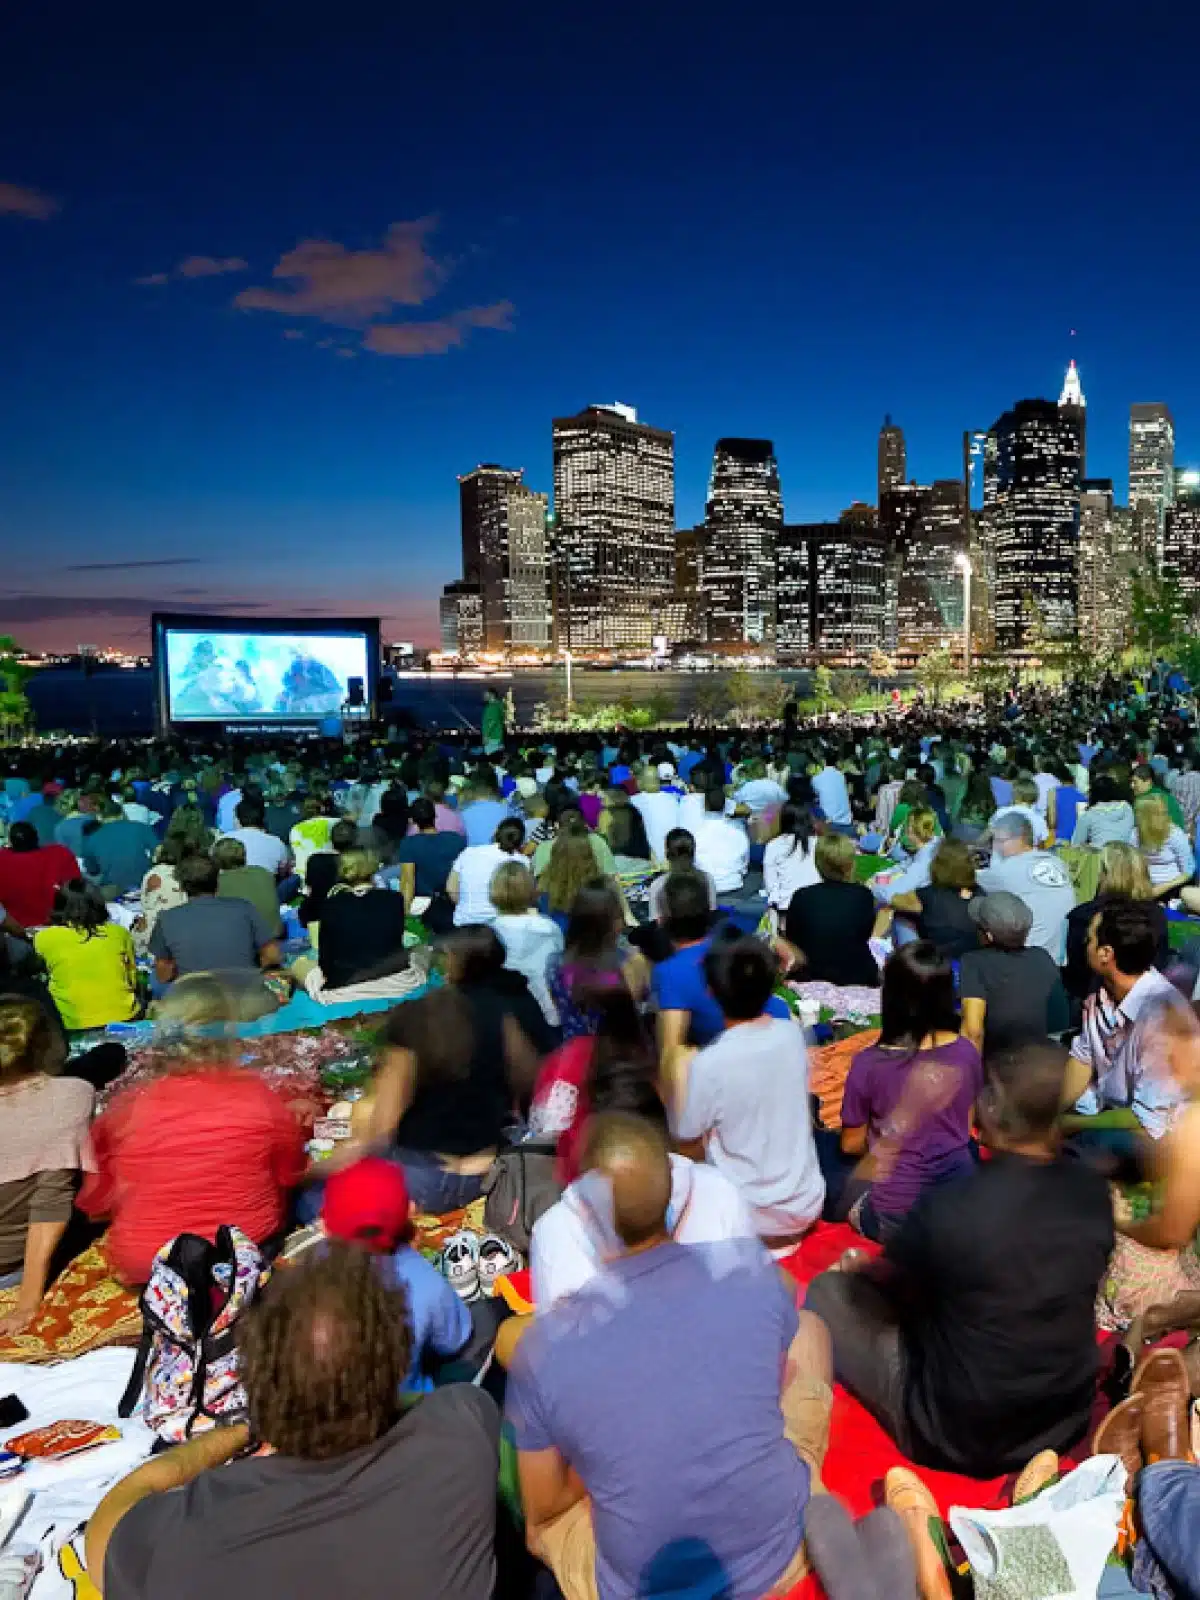 Crowd sitting on the lawn watching a movie on Pier 1 at night. Lower Manhattan is seen in the distance.